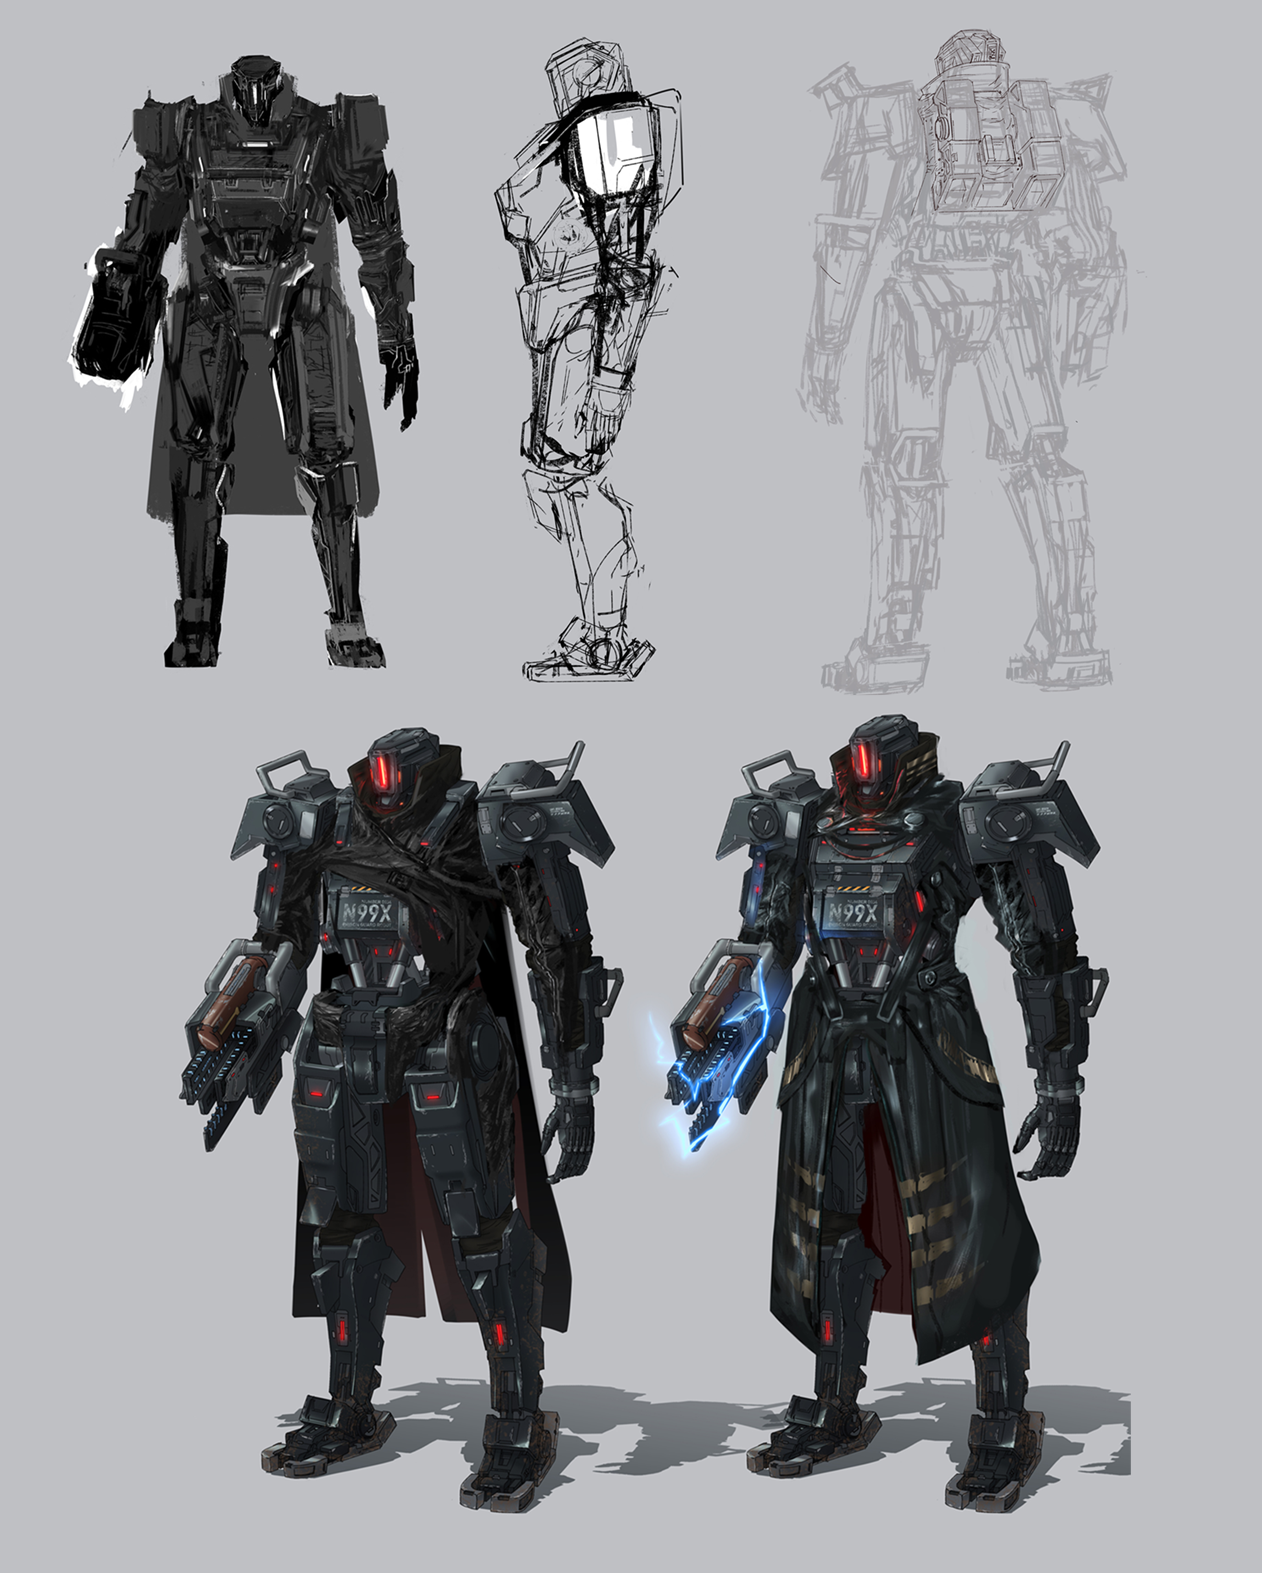 The early character design of Hunter -- Warden N99X